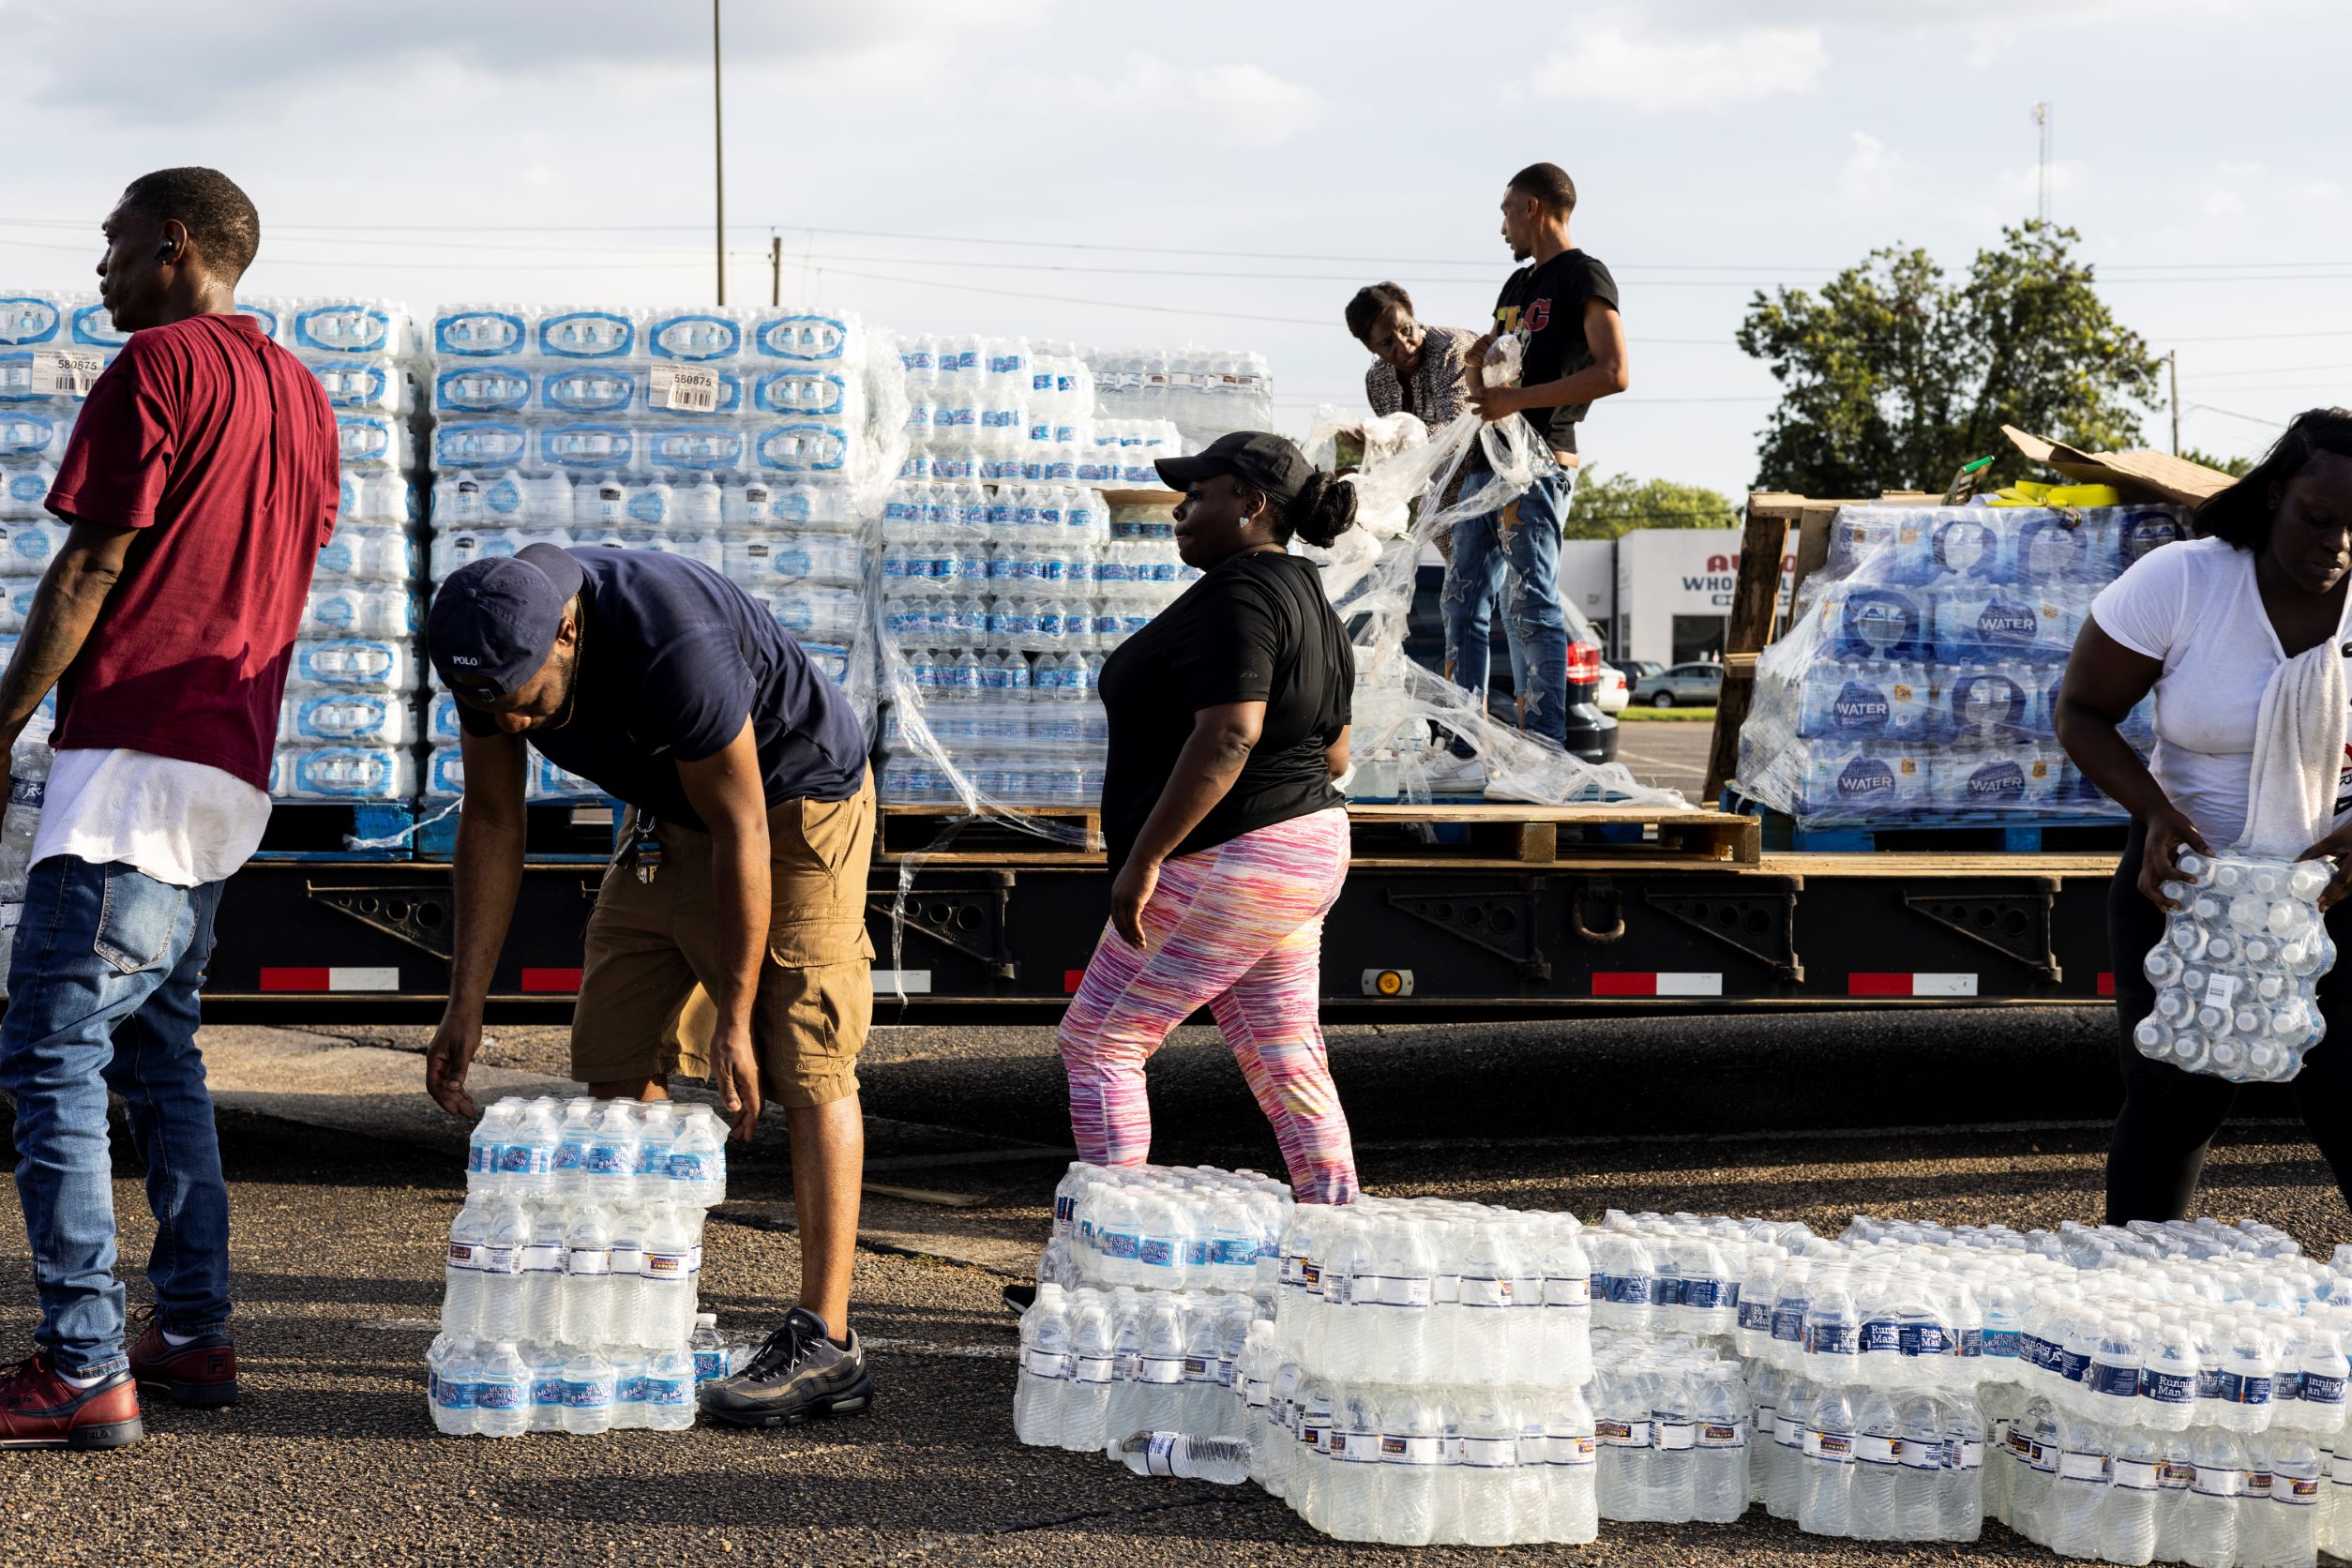 600 Mississippi National Guardsmen to Help Distribute Water in Jackson Amid Ongoing Crisis